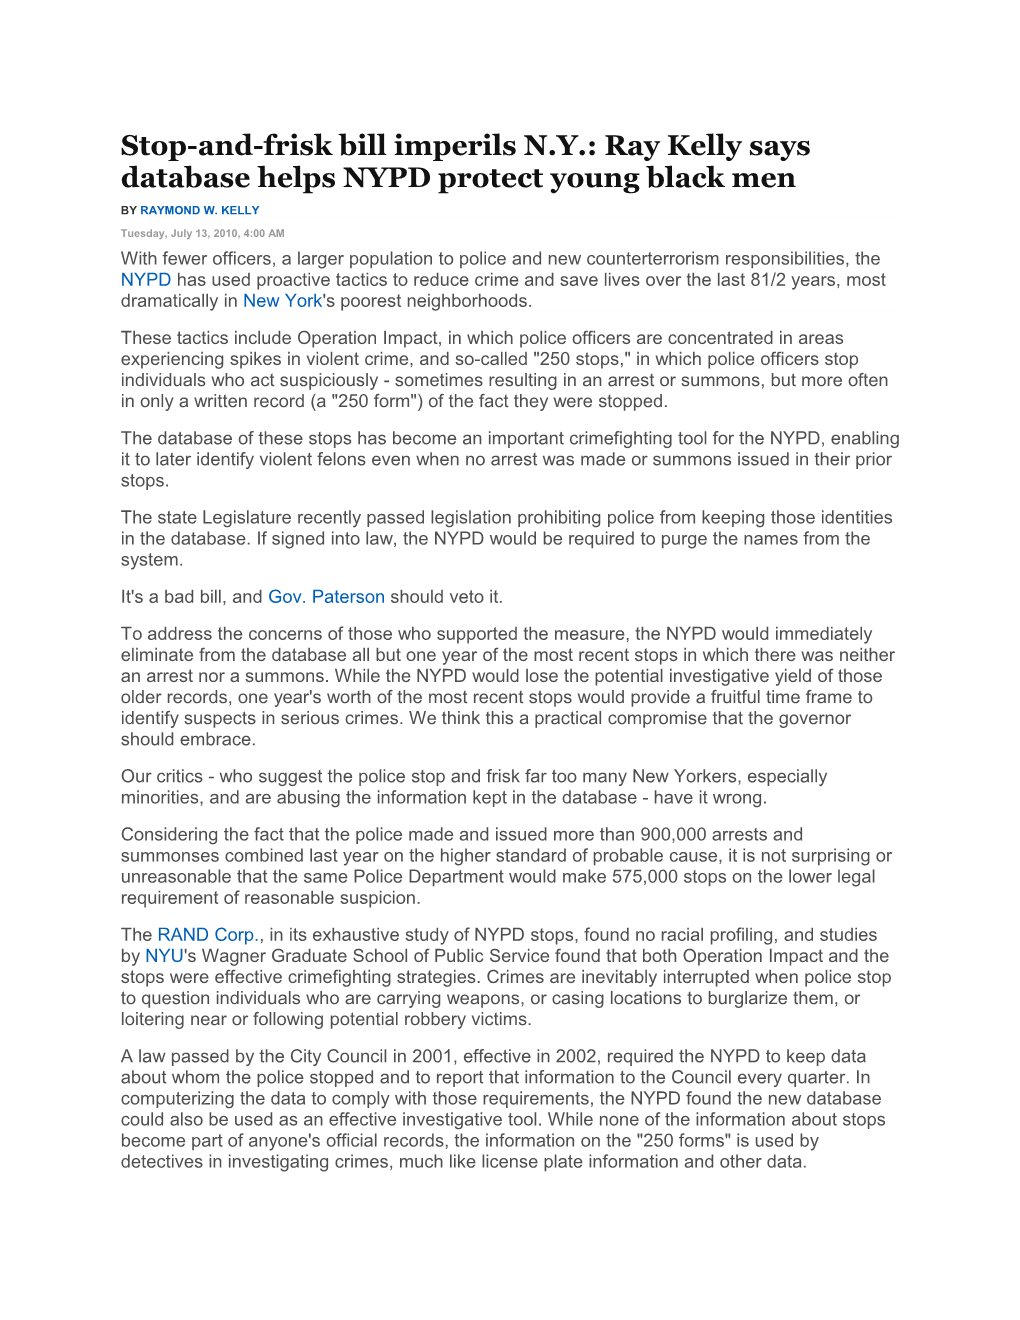 Stop-And-Frisk Bill Imperils N.Y.: Ray Kelly Says Database Helps NYPD Protect Young Black Men